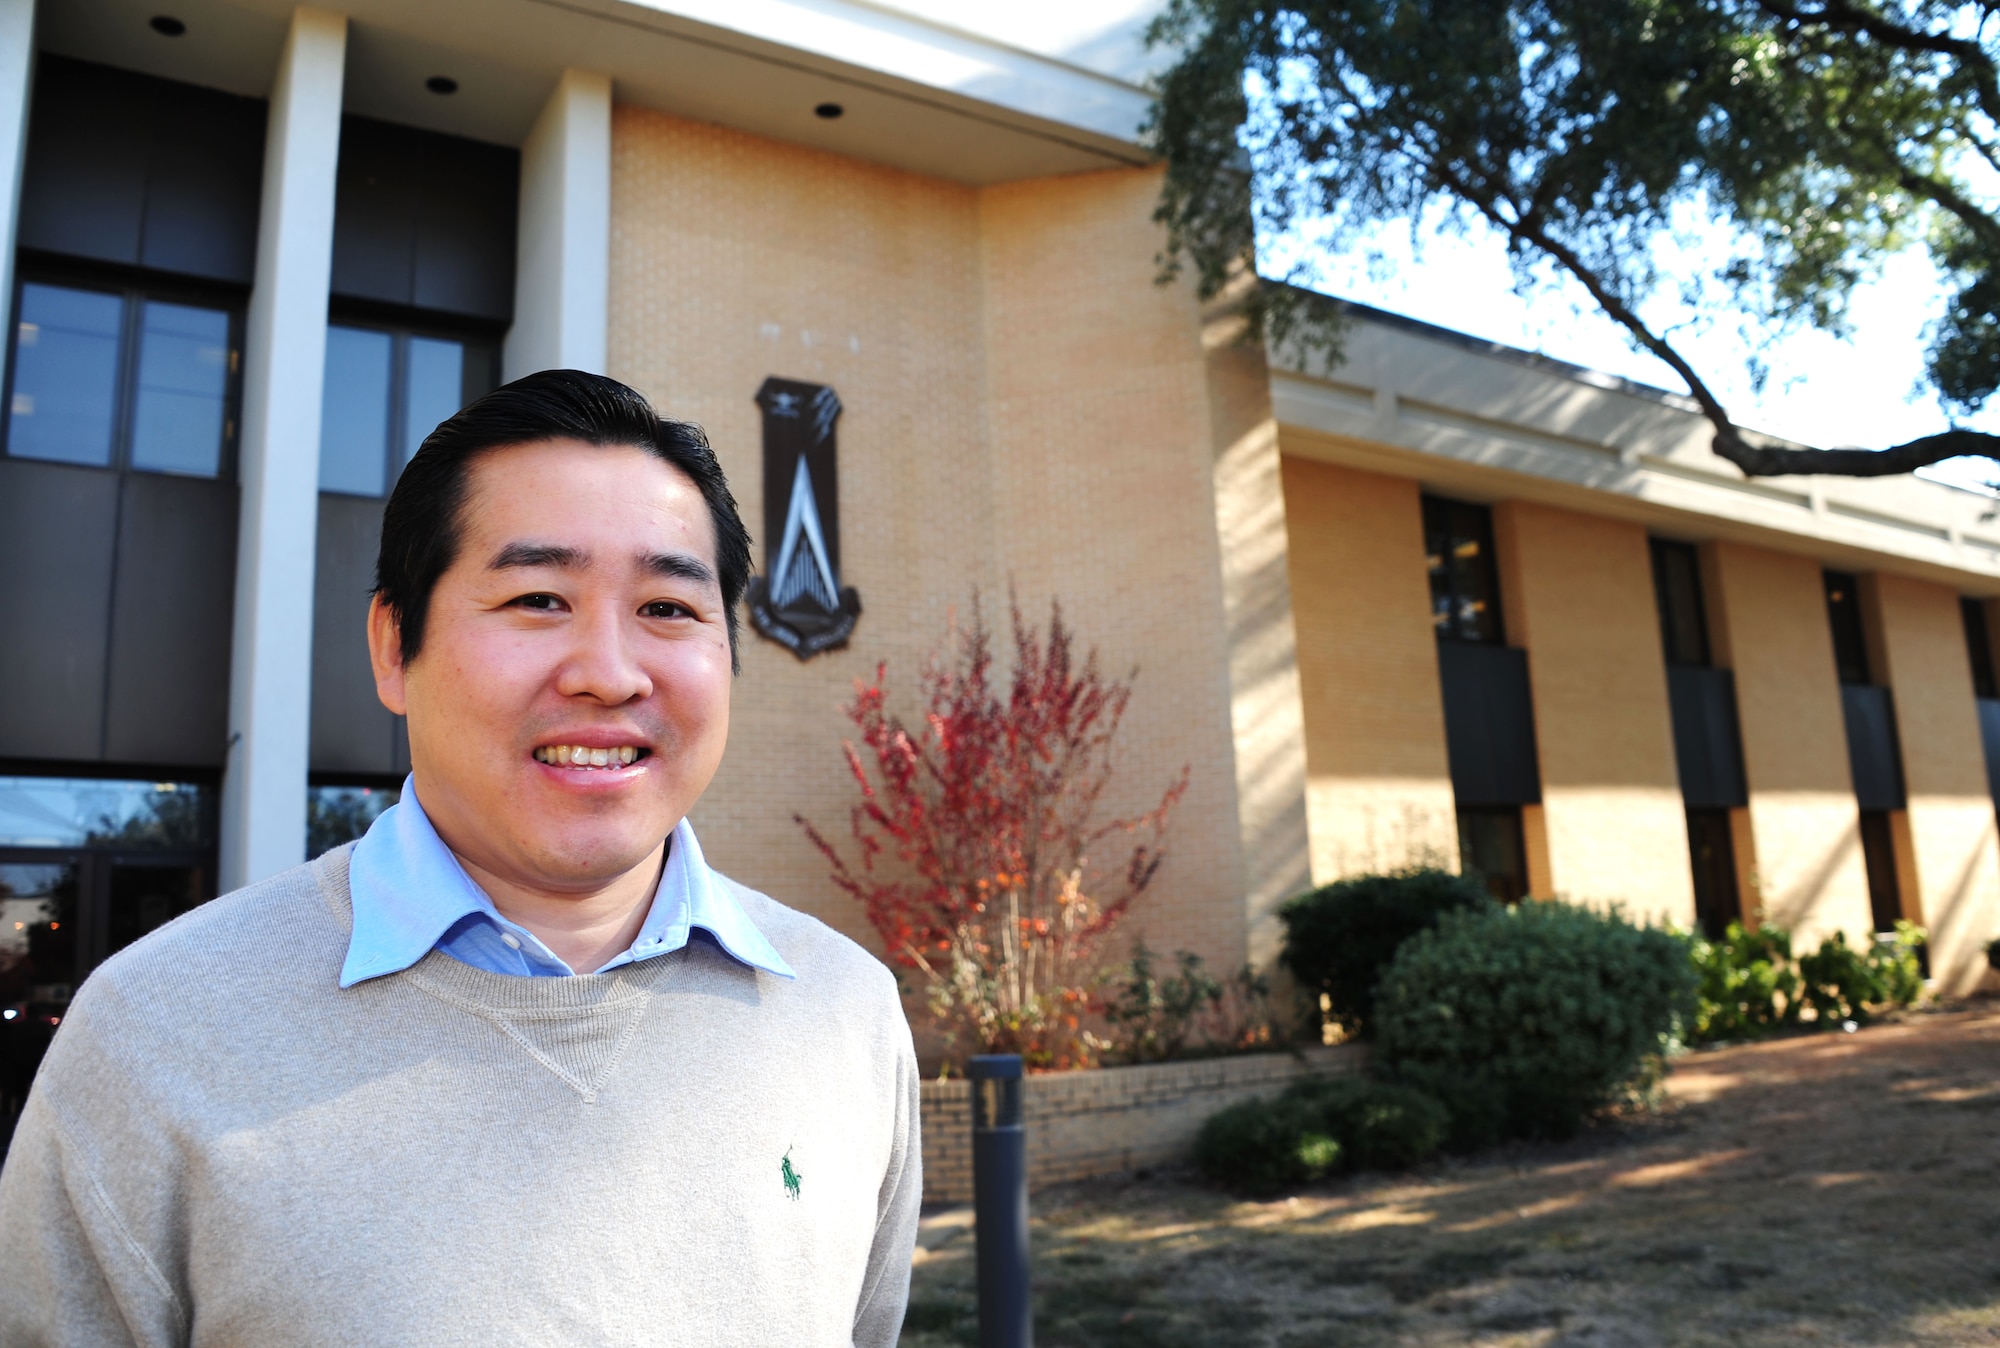 Nori Katagiri, Air War College international security studies assistant professor, stands in front of The Air University’s AWC at Maxwell Air Force Base, Alabama, Nov. 14, 2014. Katagiri was born in Japan before traveling to the U.S. on a student visa and earning his Ph. D. from the University of Pennsylvania. (U.S. Air Force photo by Airman 1st Class Alexa Culbert/Cleared)